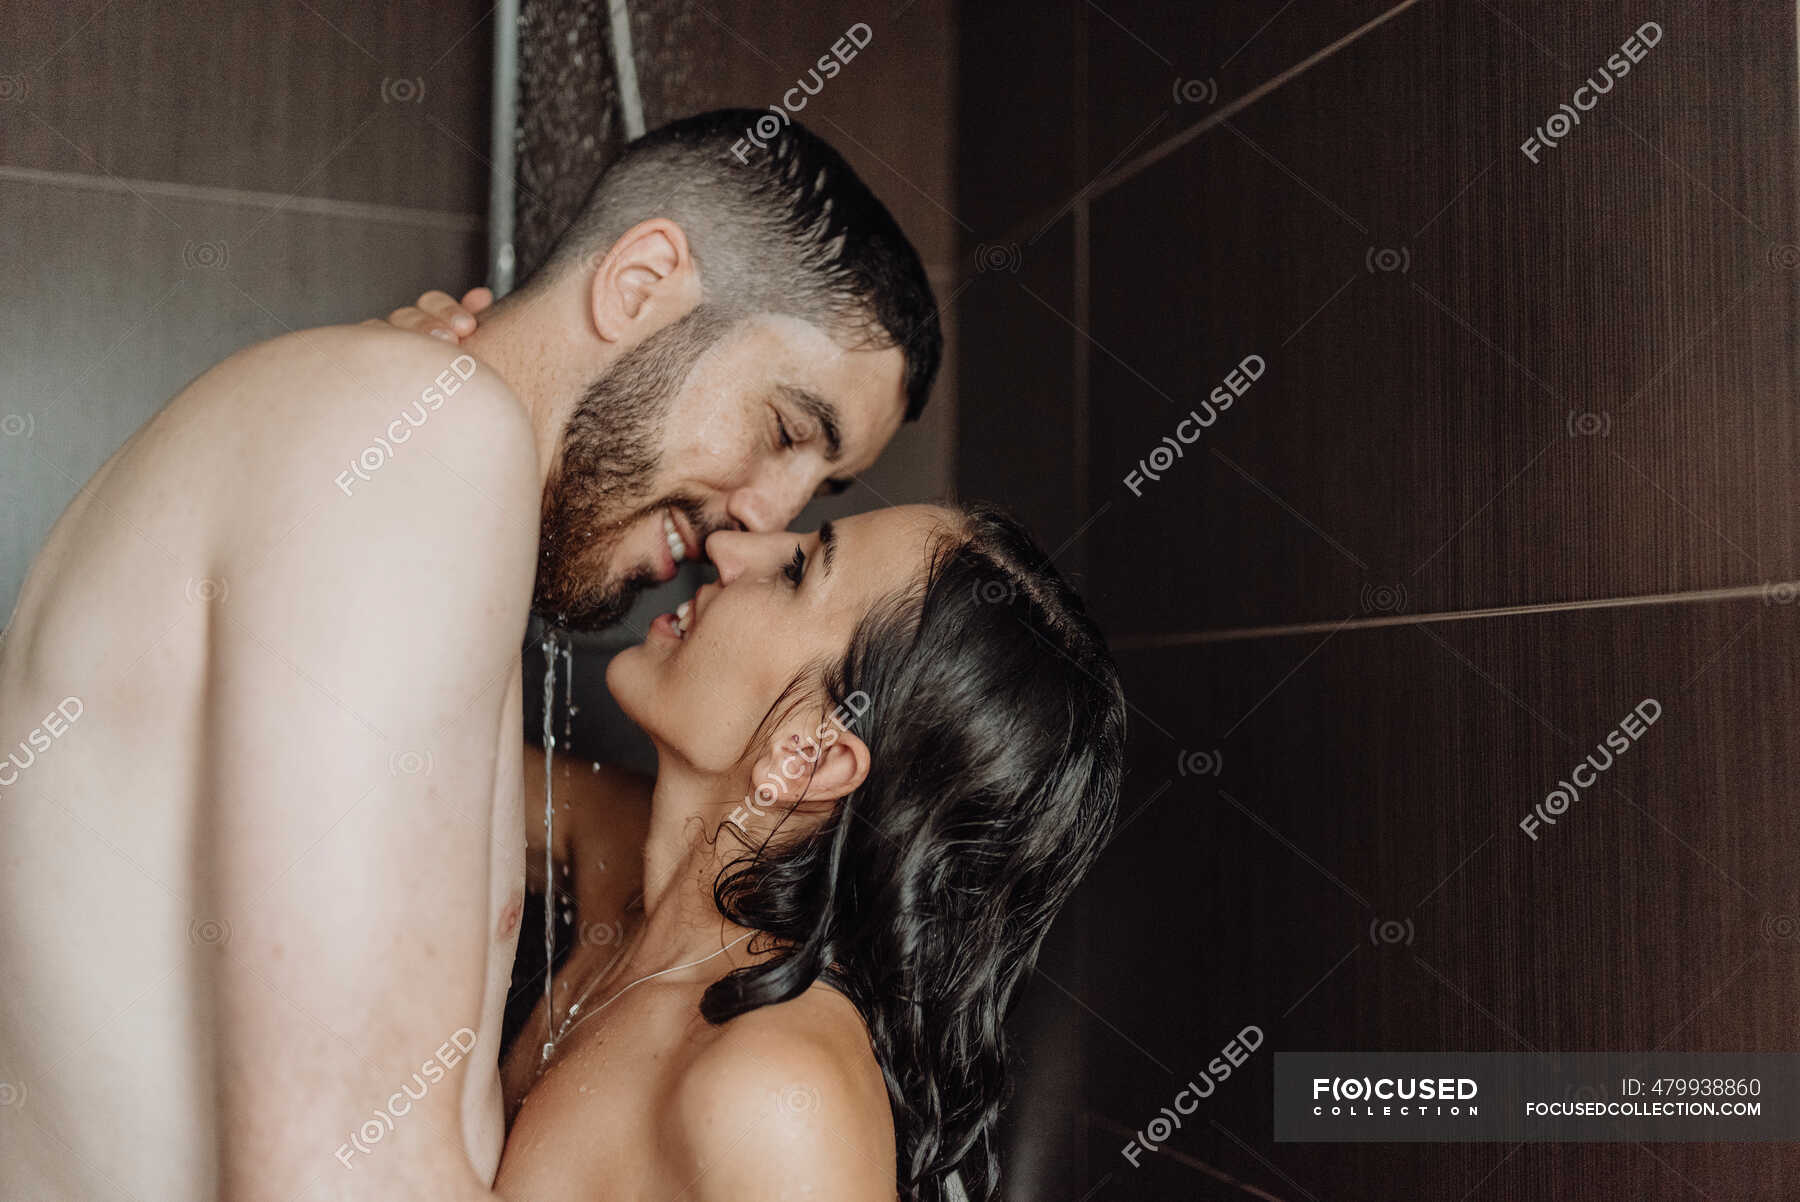 Naked romantic couple dating together in bathroom — relationship, falling  in love - Stock Photo | #479938860